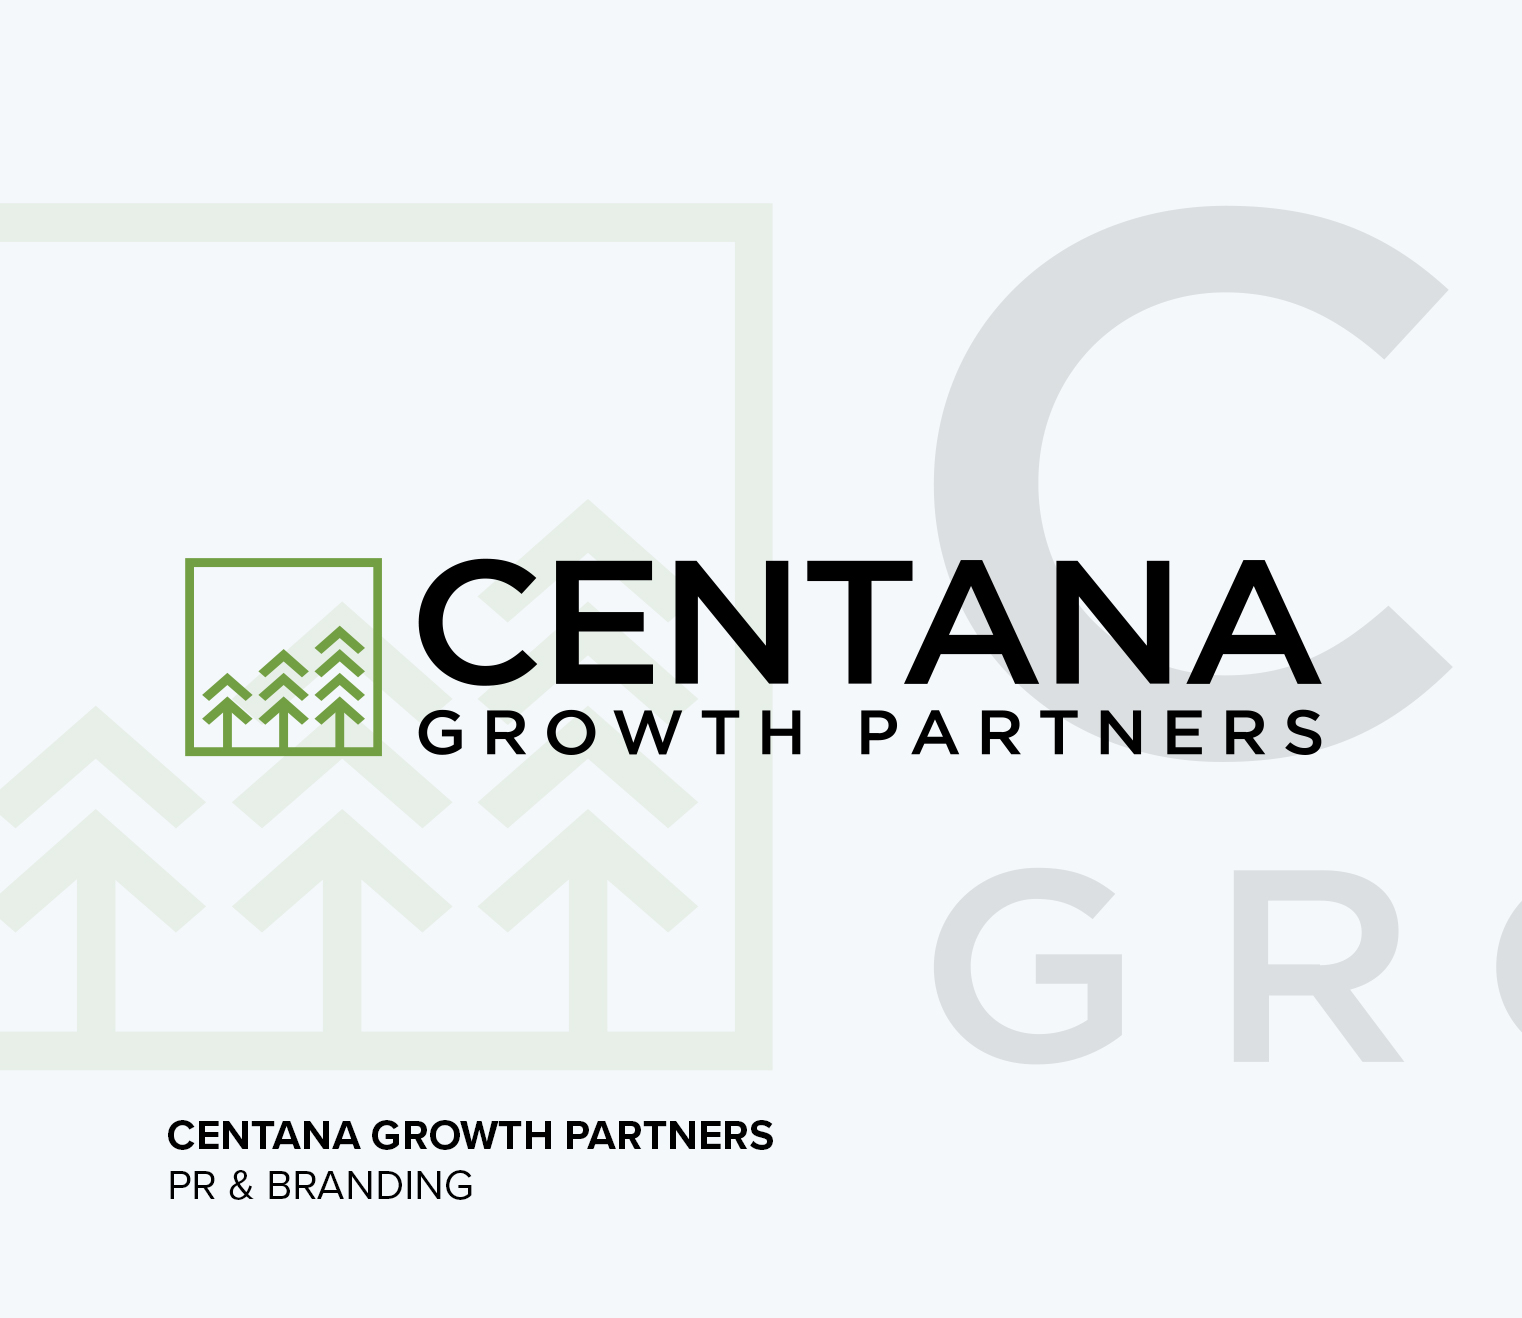 Logo for Centana in black text, with a green graphic depicting trees.